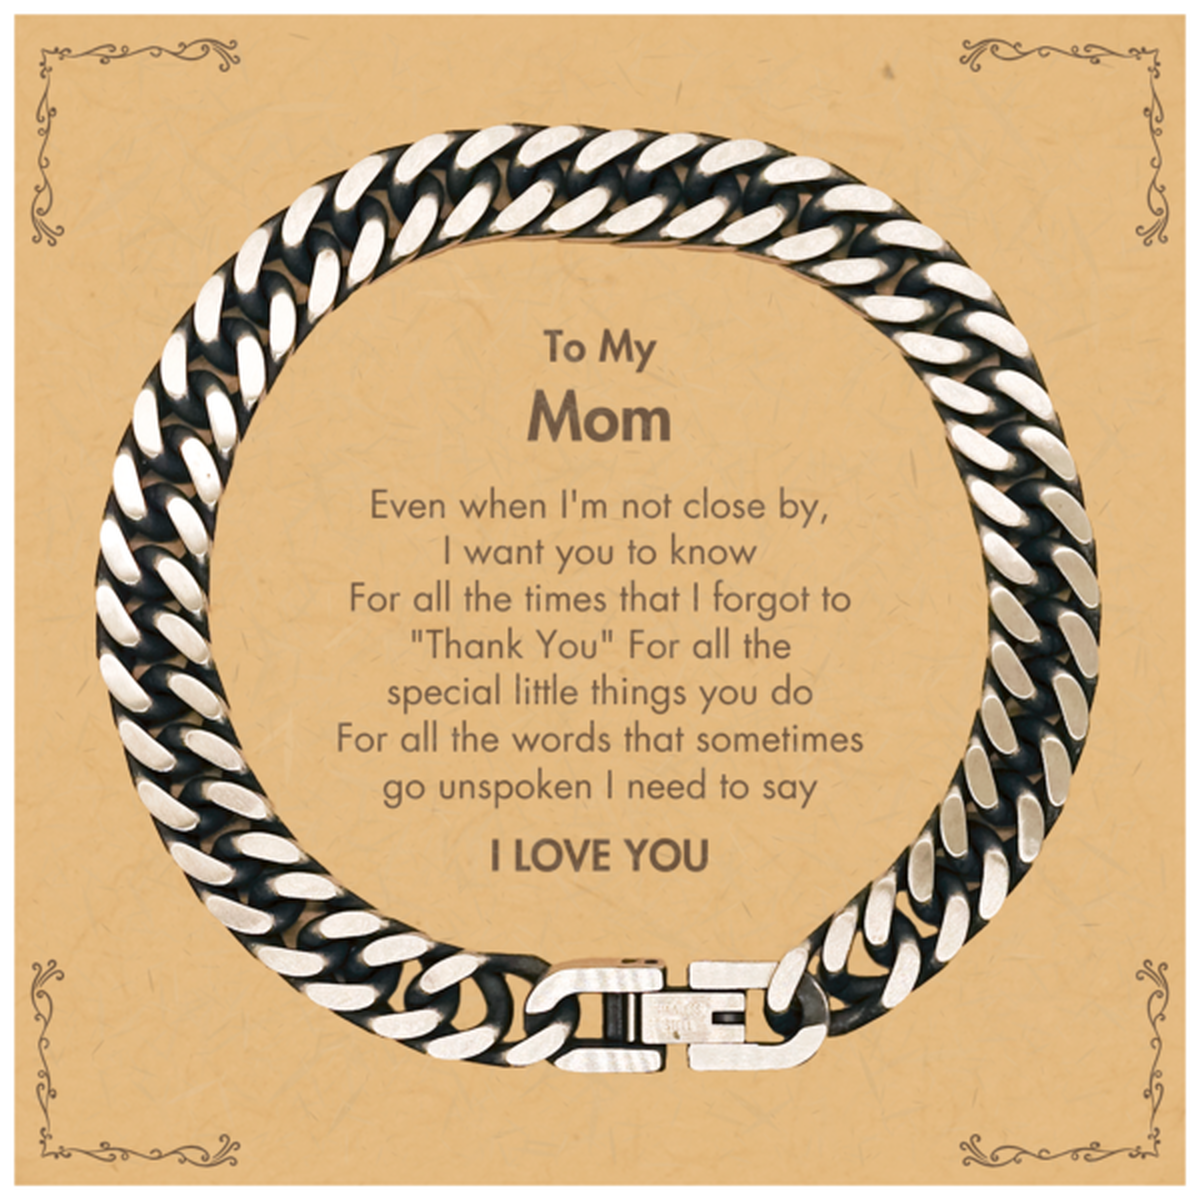 Thank You Gifts for Mom, Keepsake Cuban Link Chain Bracelet Gifts for Mom Birthday Mother's day Father's Day Mom For all the words That sometimes go unspoken I need to say I LOVE YOU